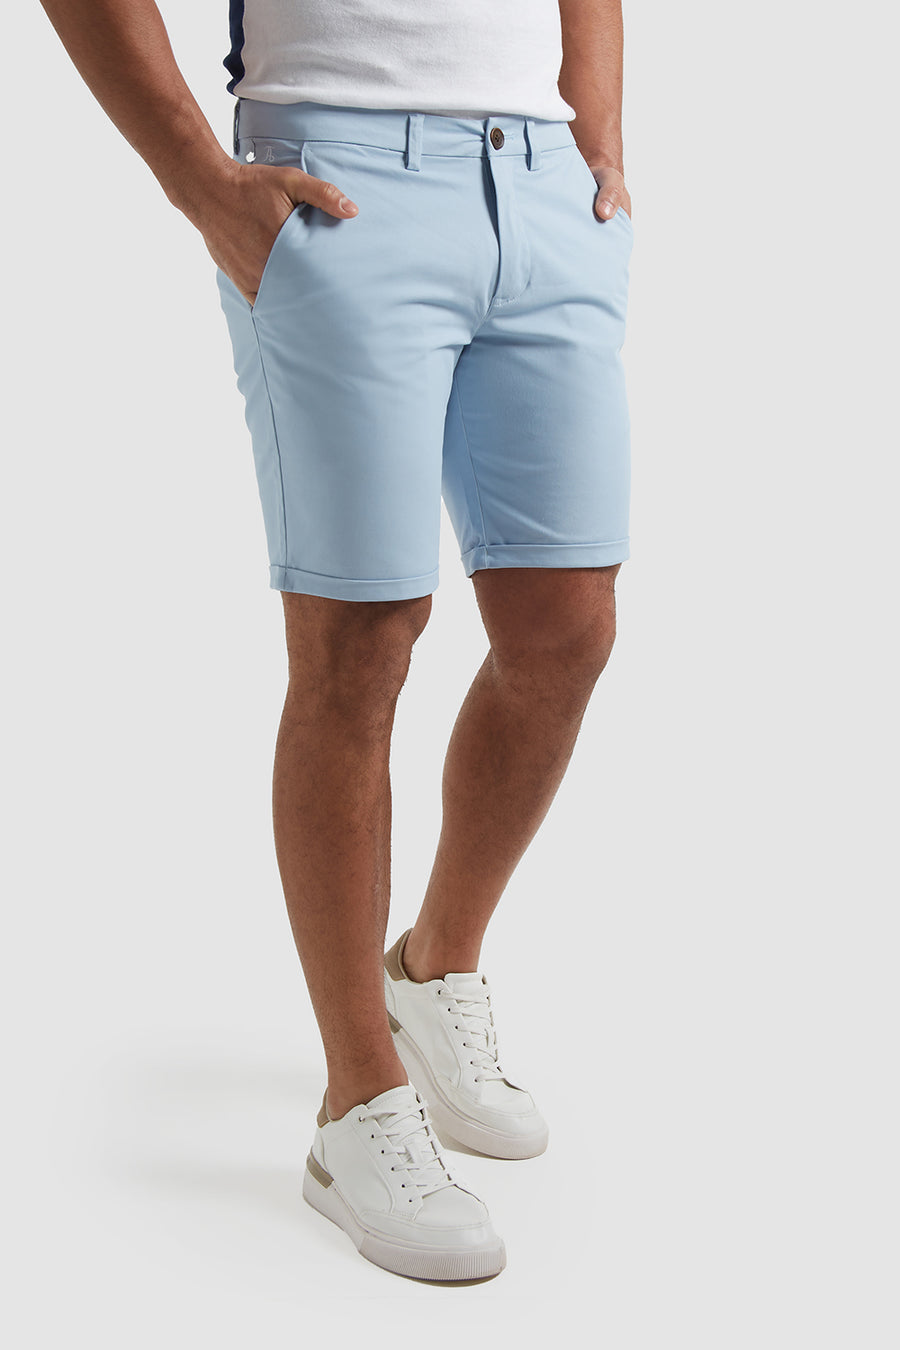 ATHLETE USA - Navy Athletic - in Fit TAILORED Chino Shorts